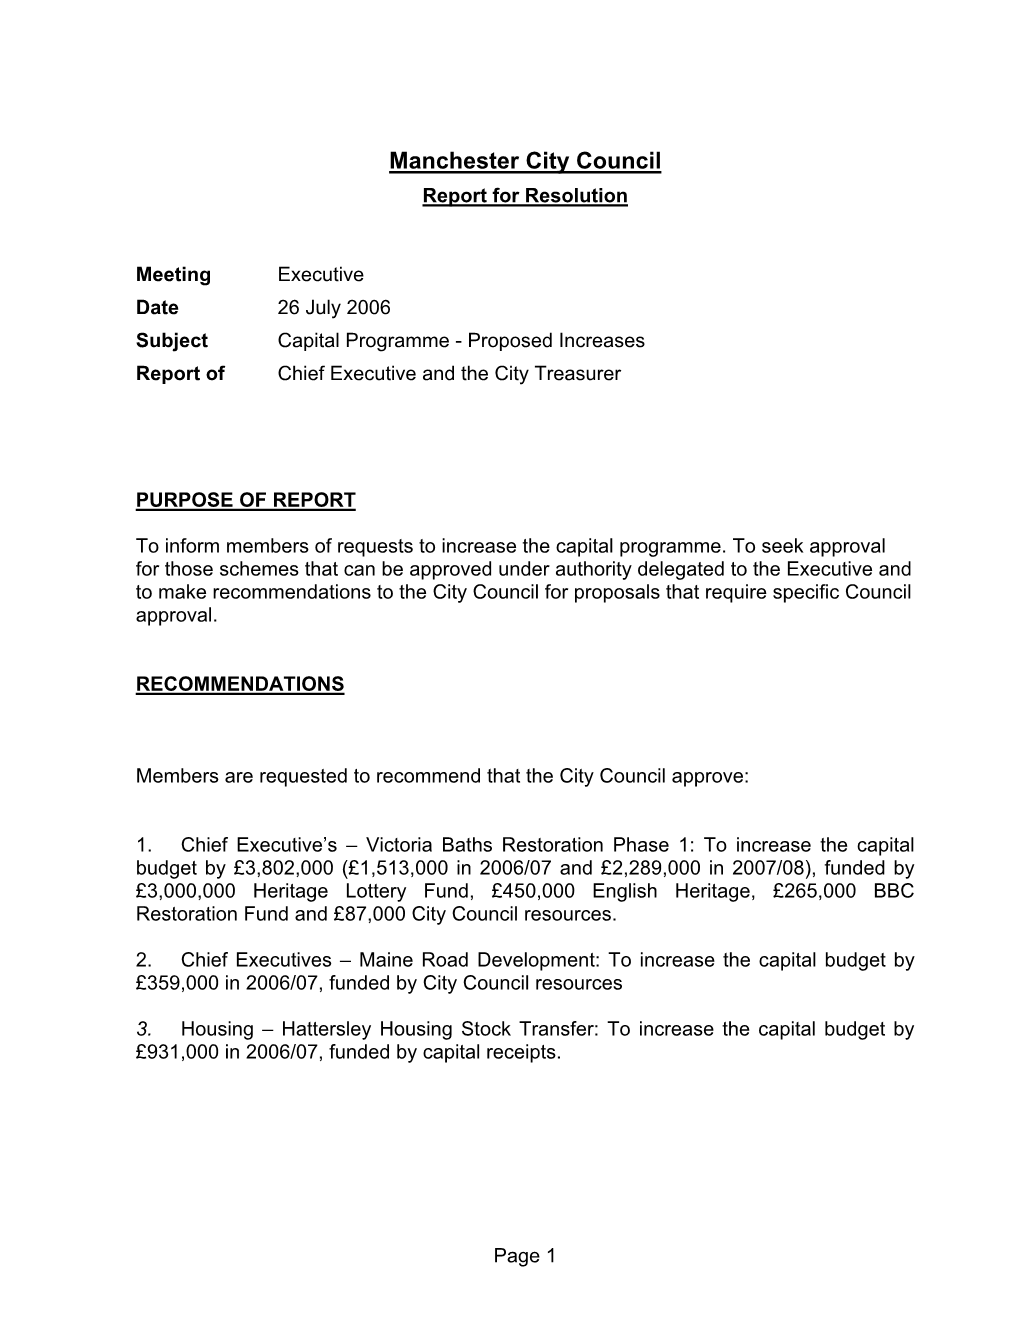 Manchester City Council Report for Resolution